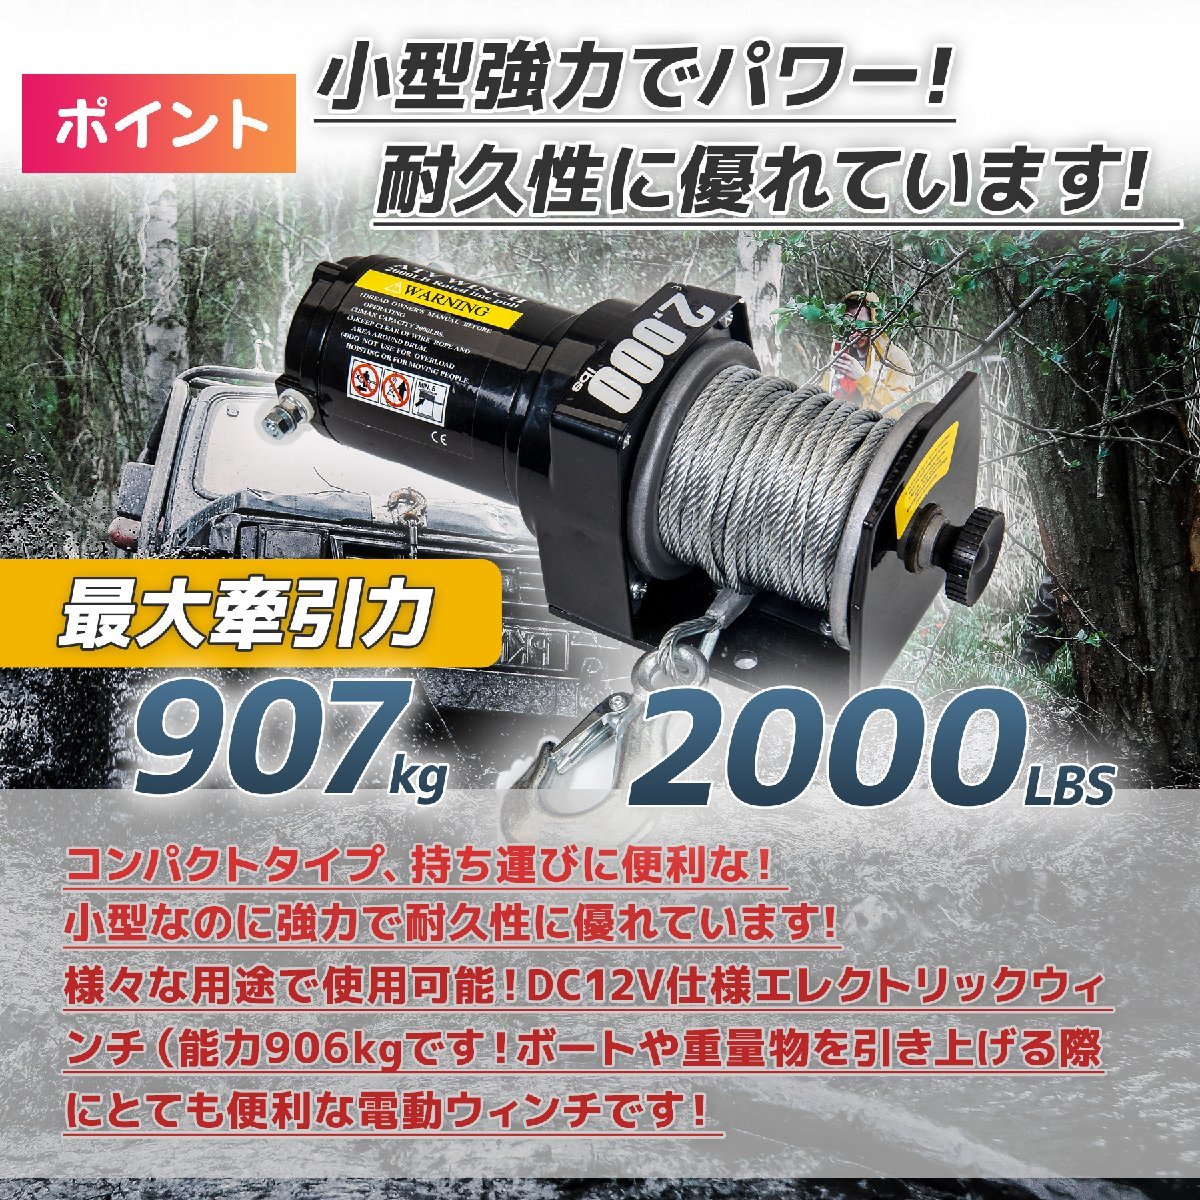 [ full set ] DC12V electric winch maximum traction 907kg( 2000LBS) electric winch discount up machine ... waterproof specification * special price!